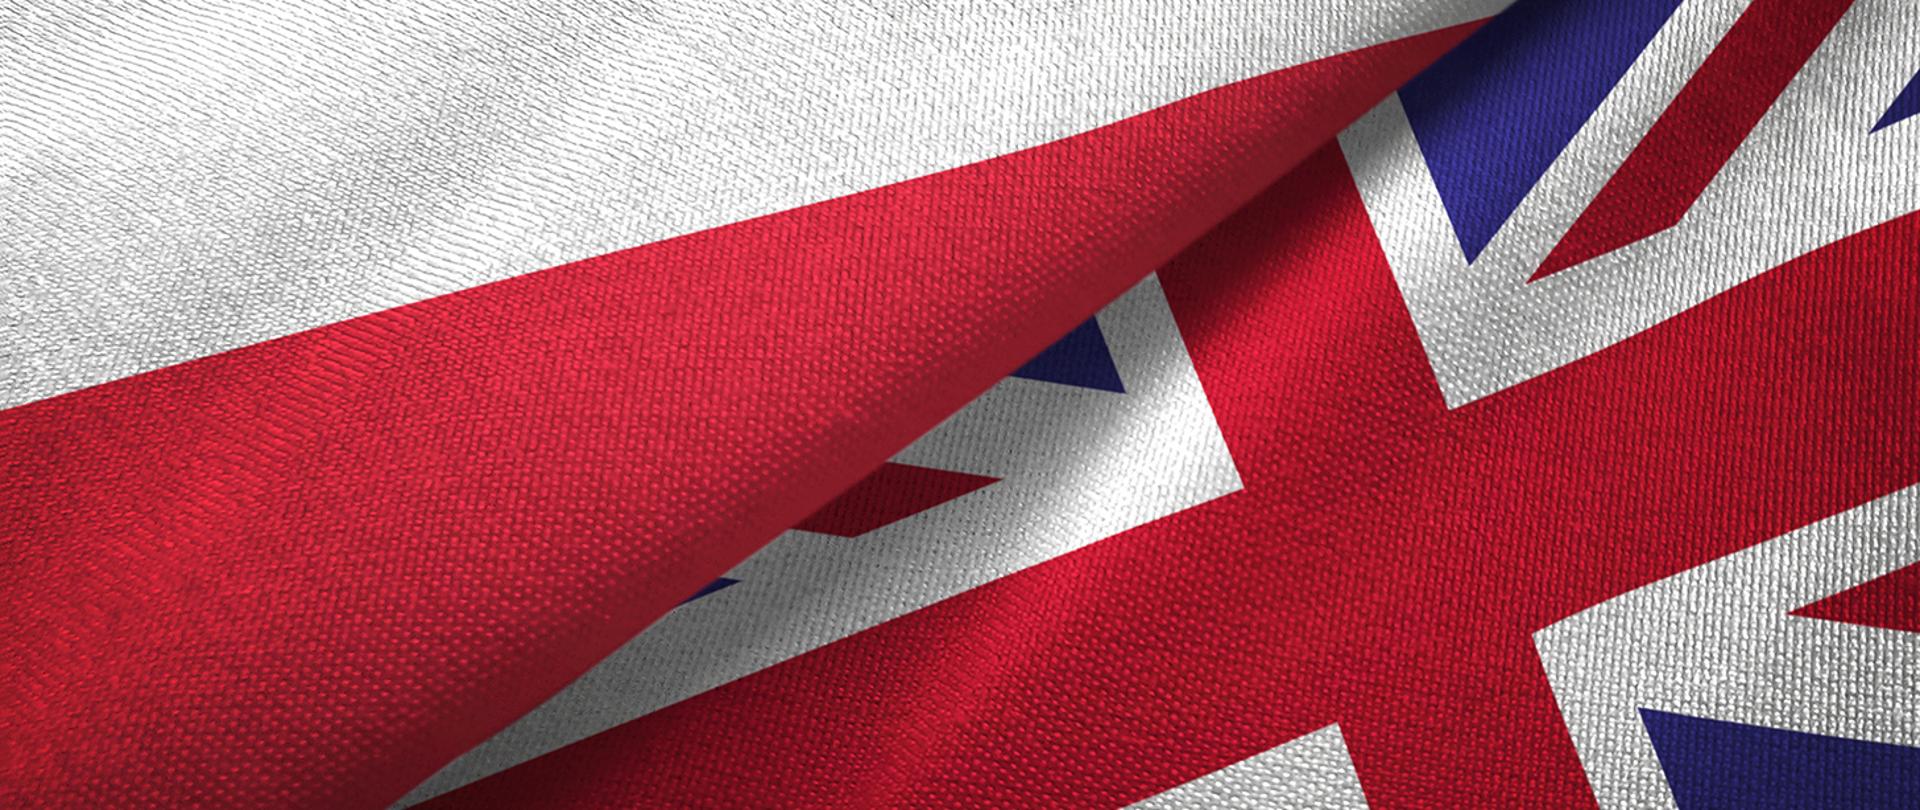 Poland and United Kingdom flags together textile cloth, fabric texture